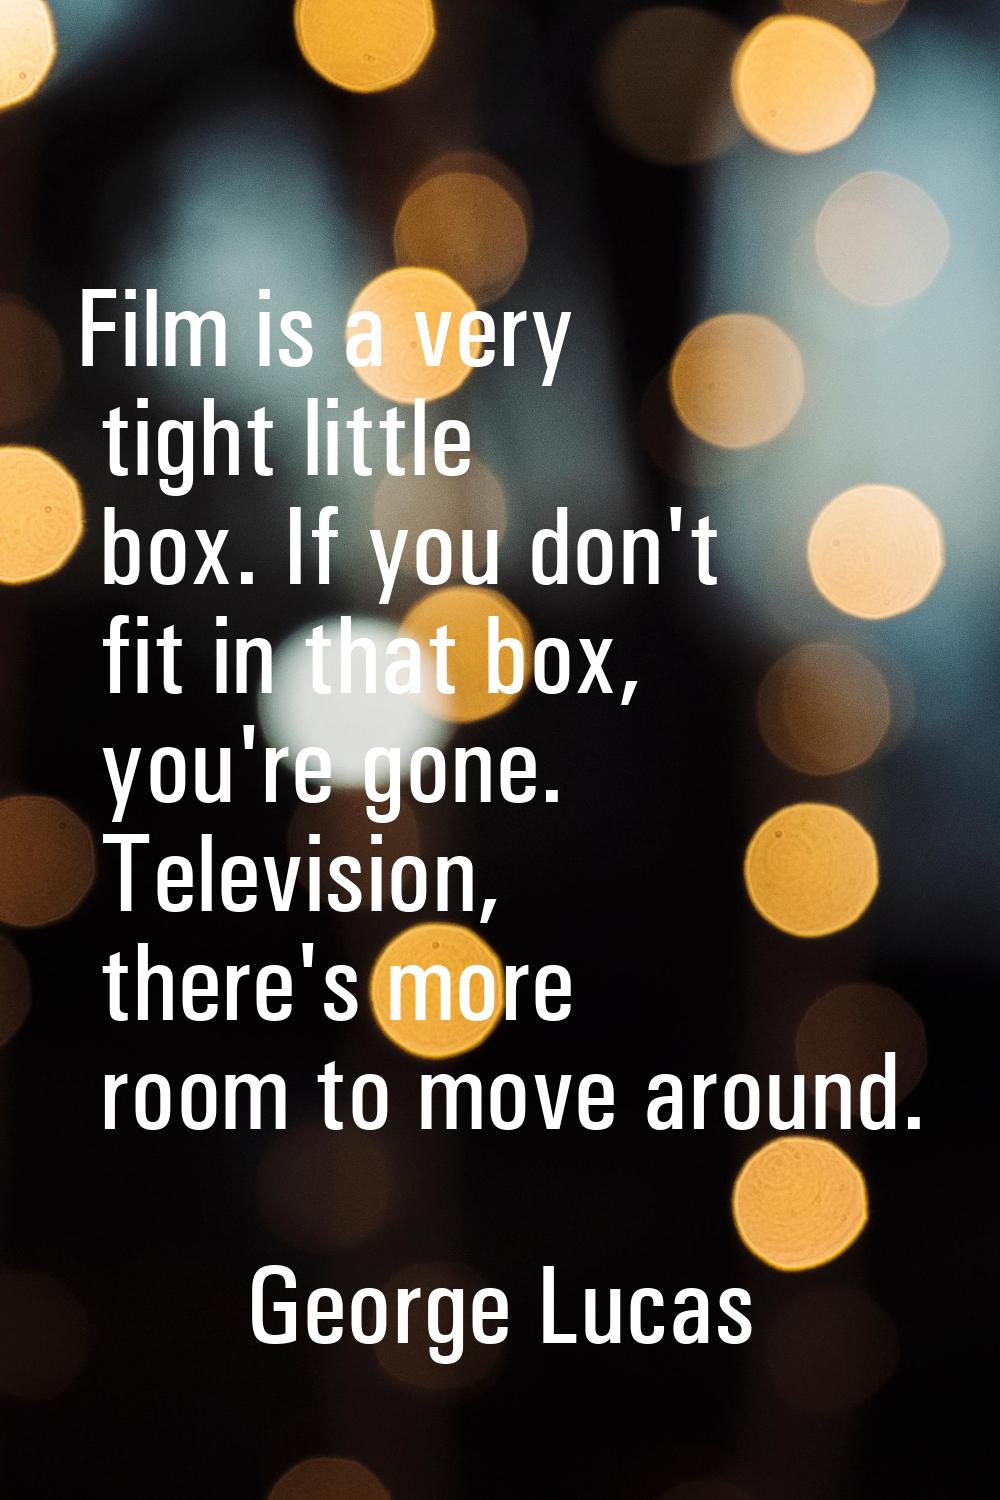 Film is a very tight little box. If you don't fit in that box, you're gone. Television, there's mor